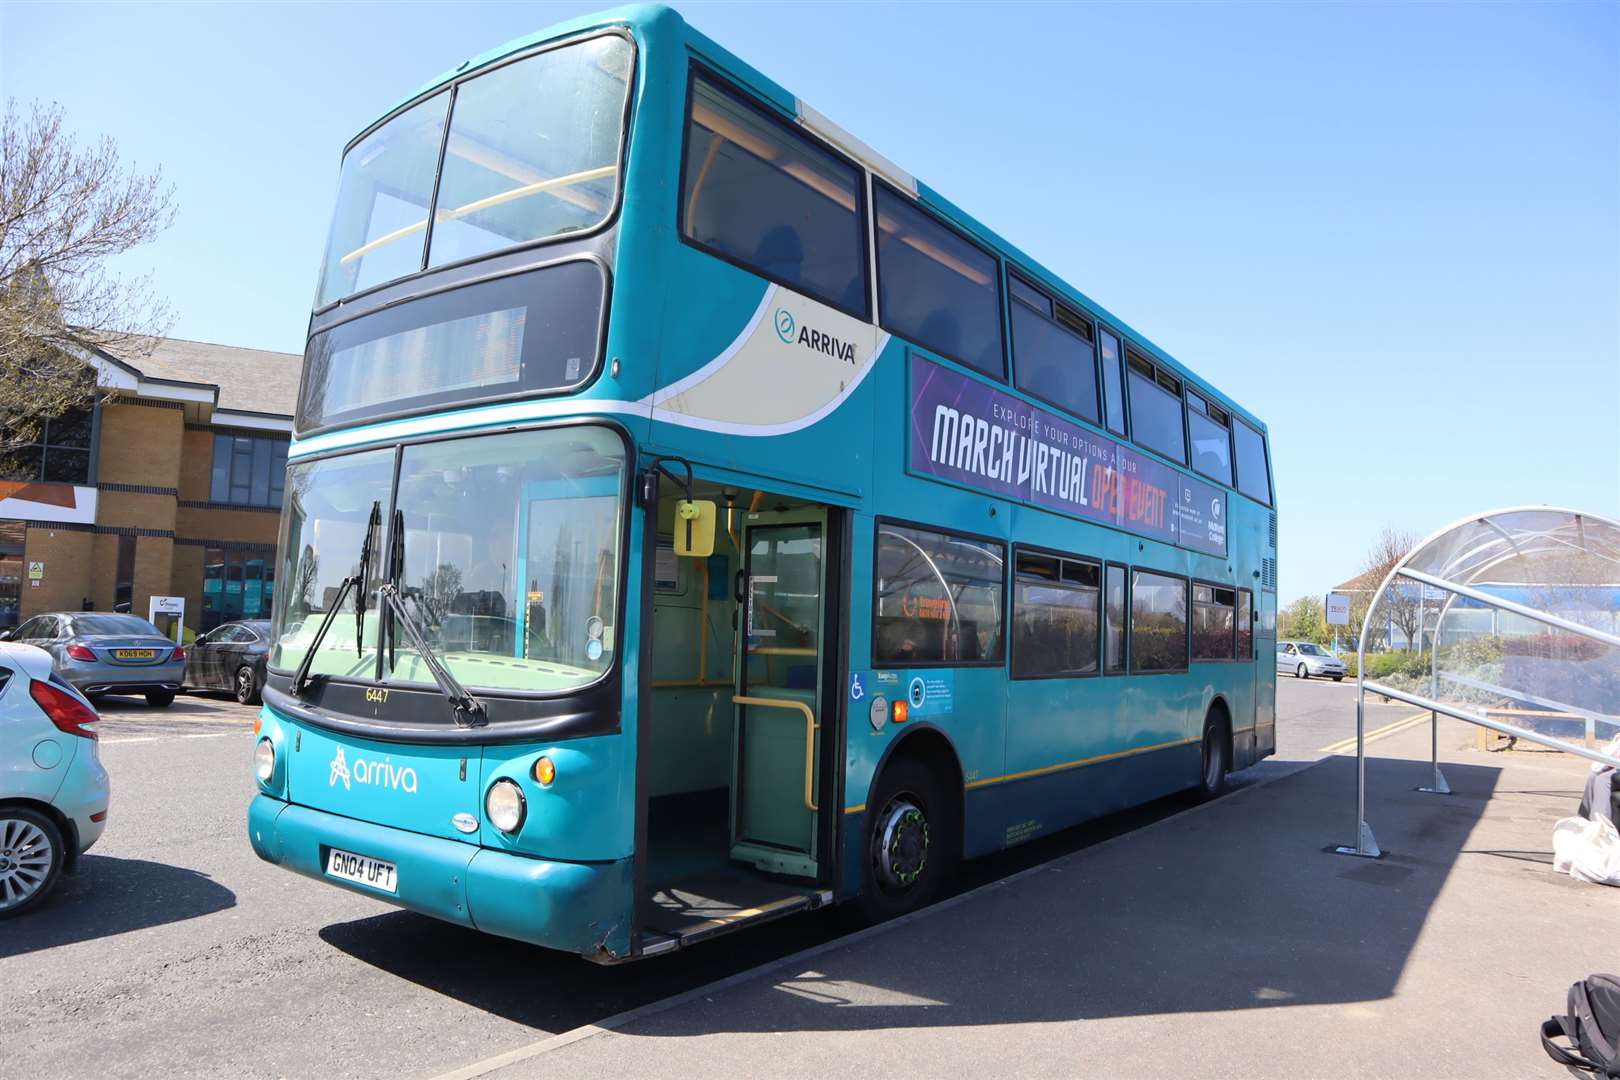 Arriva double-decker bus at Sheerness Tesco